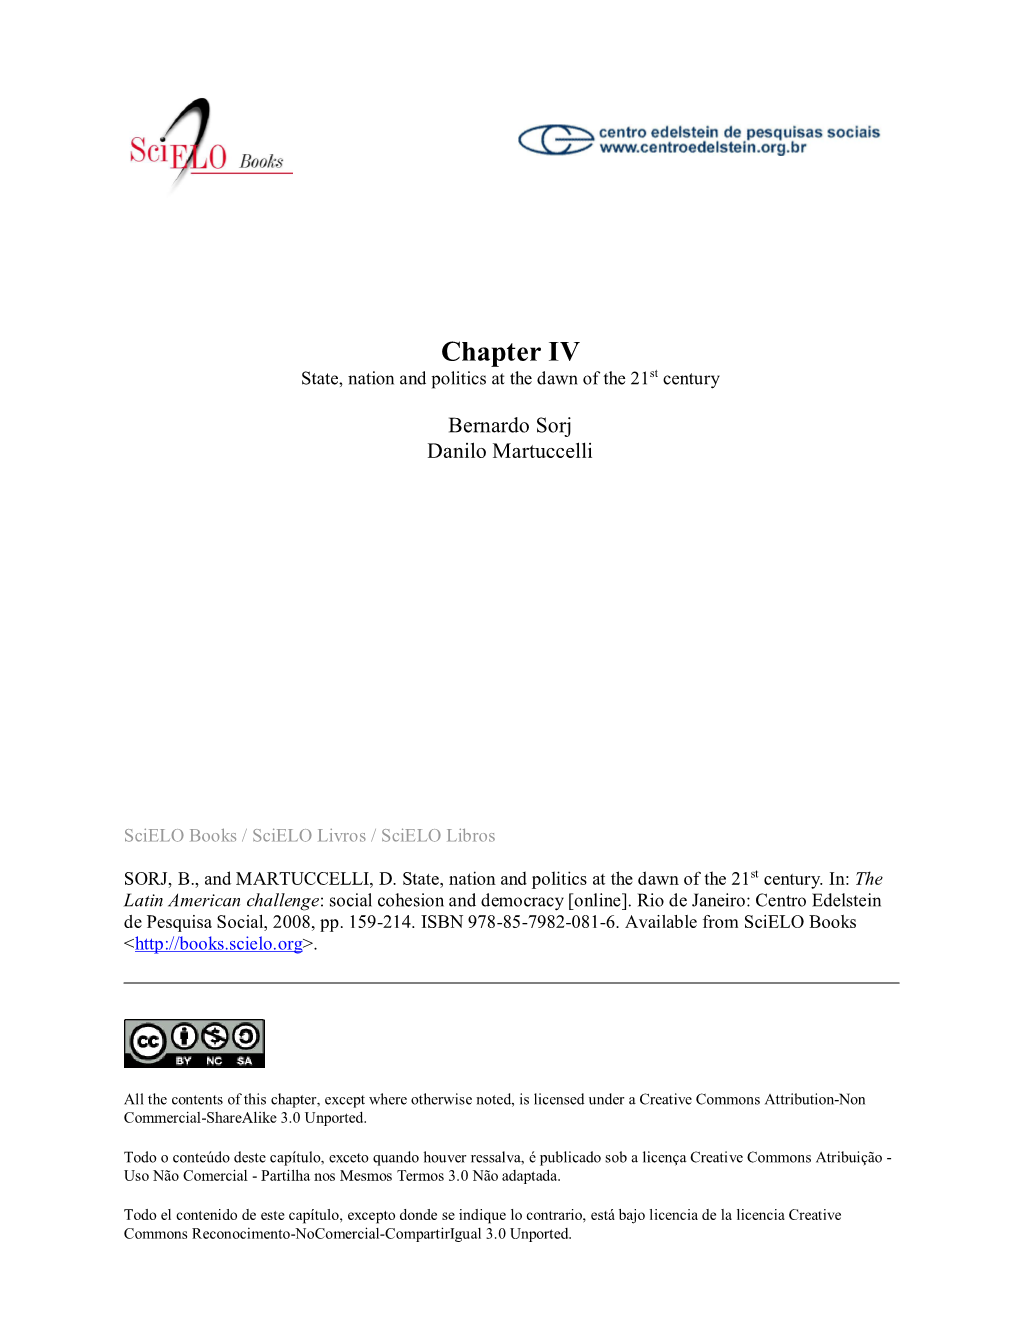 Chapter IV State, Nation and Politics at the Dawn of the 21St Century